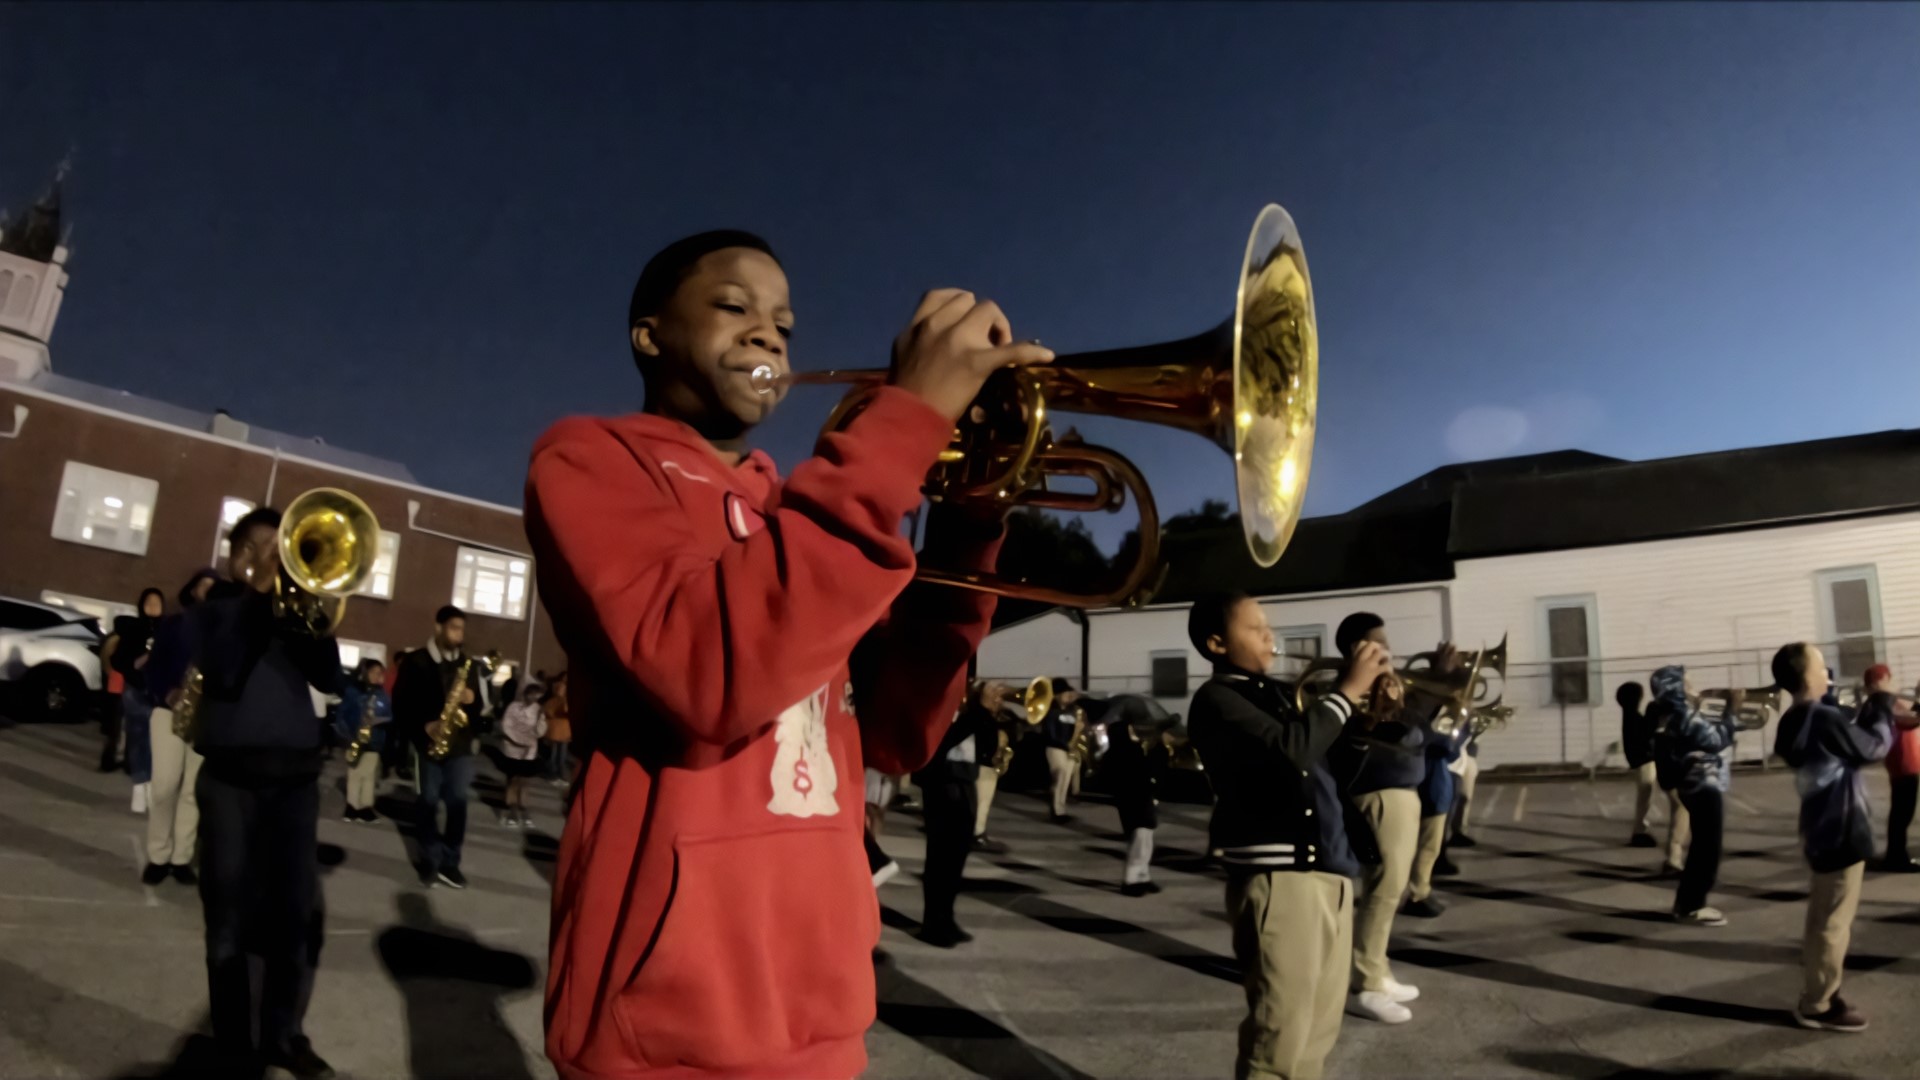 “It’s much easier for a kid to get a gun than a musical instrument, and in a city of music, that’s the craziest thing in the world to me," Derrick Tabb said.